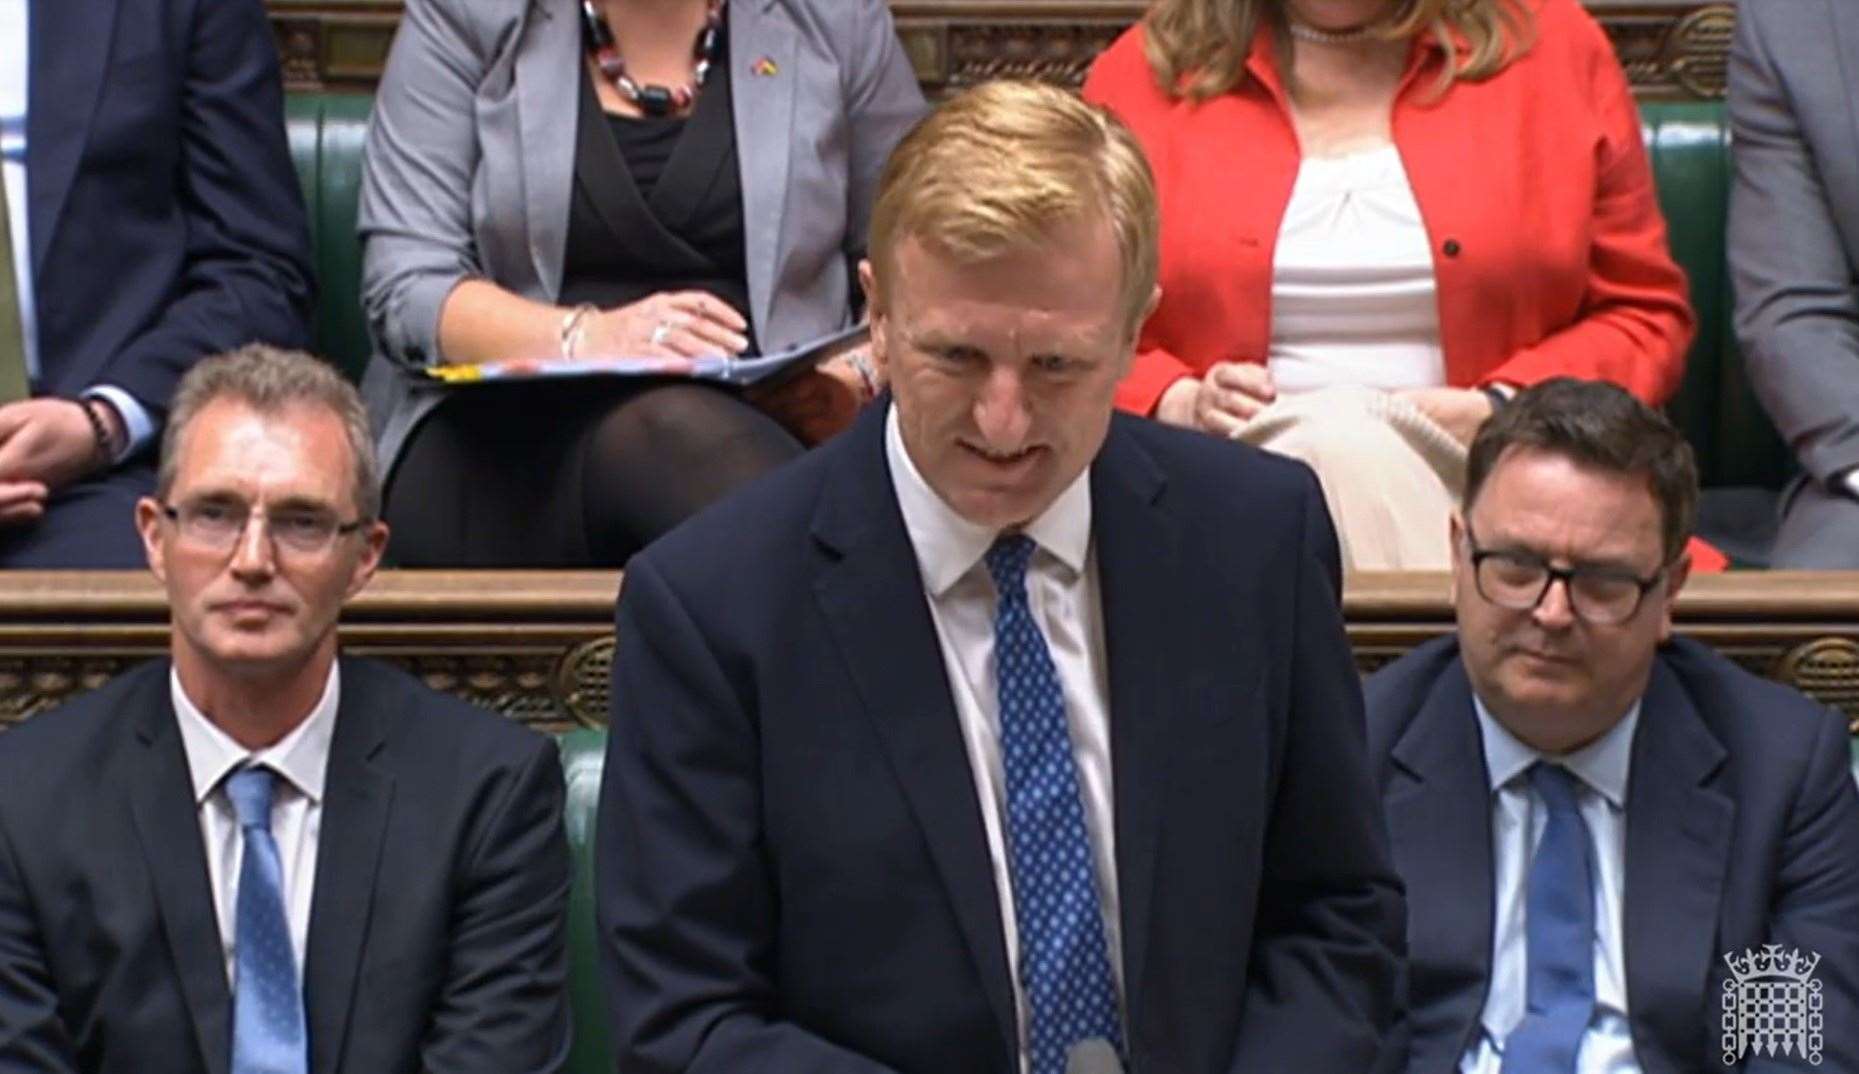 Oliver Dowden led Prime Minister’s Questions in the Commons on Wednesday (House of Commons/UK Parliament/PA)